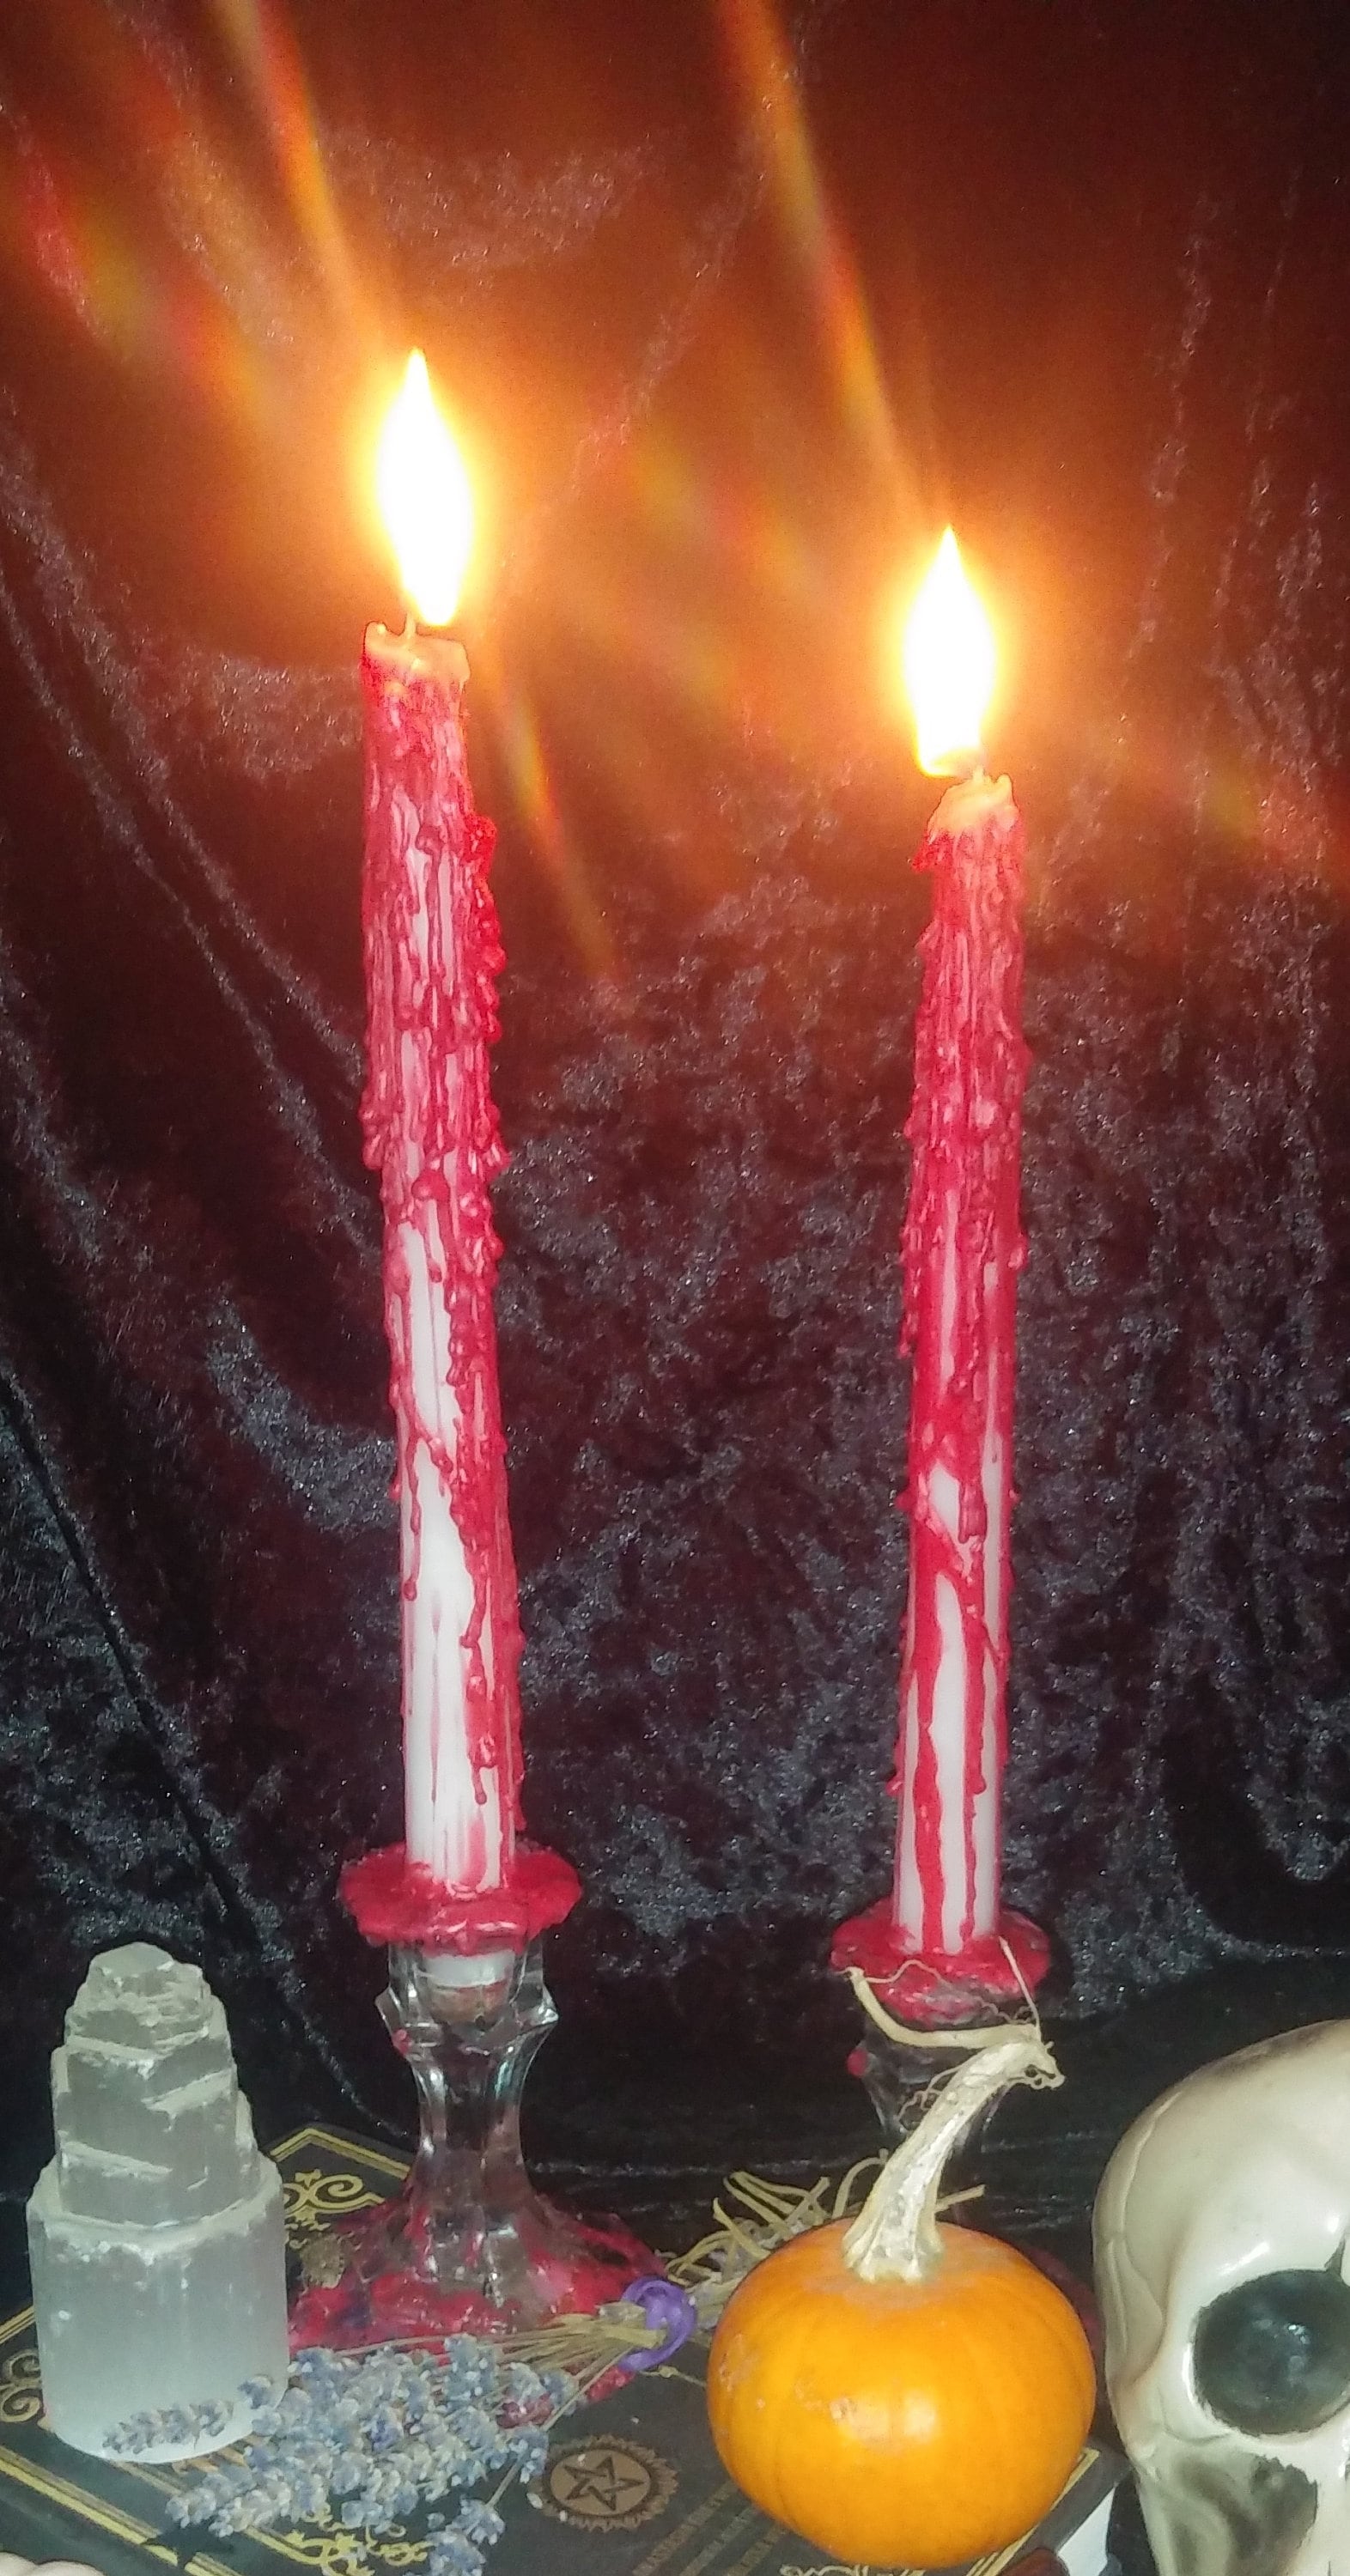 Red skull - Beeswax candle